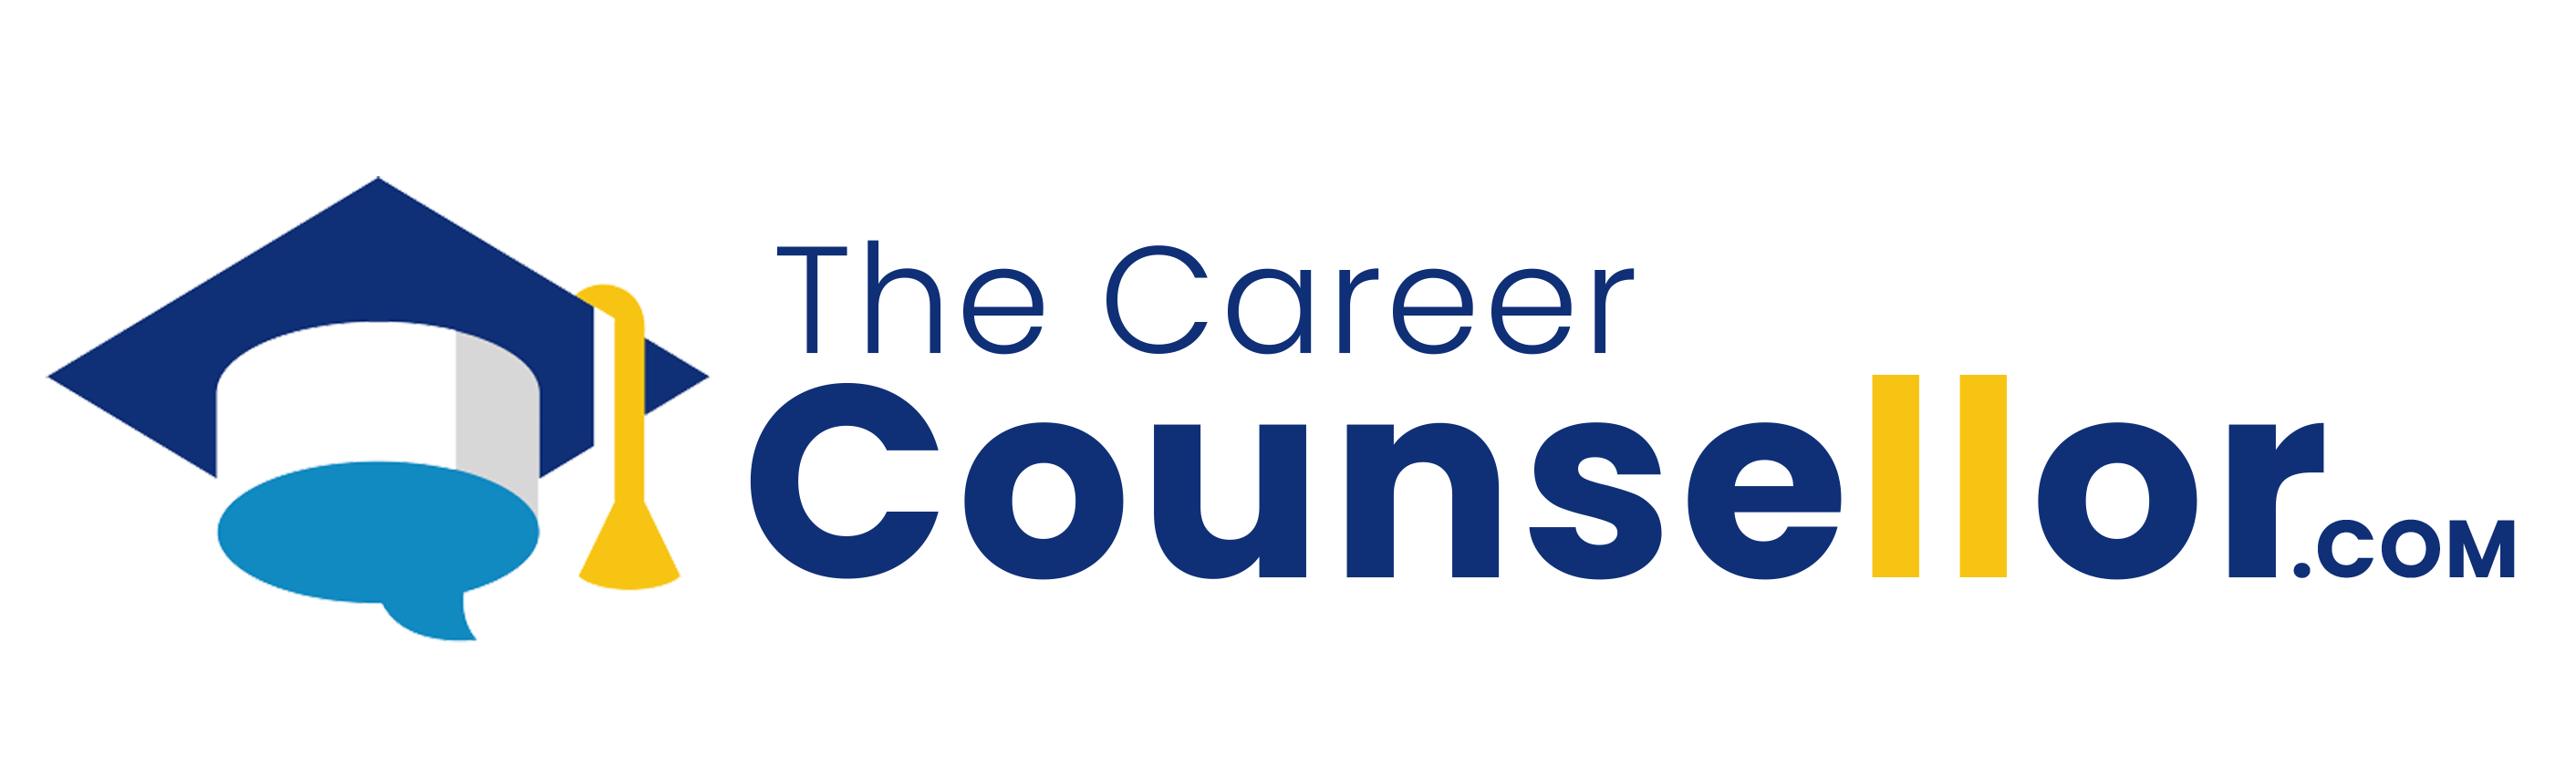 Thecareercounsellor